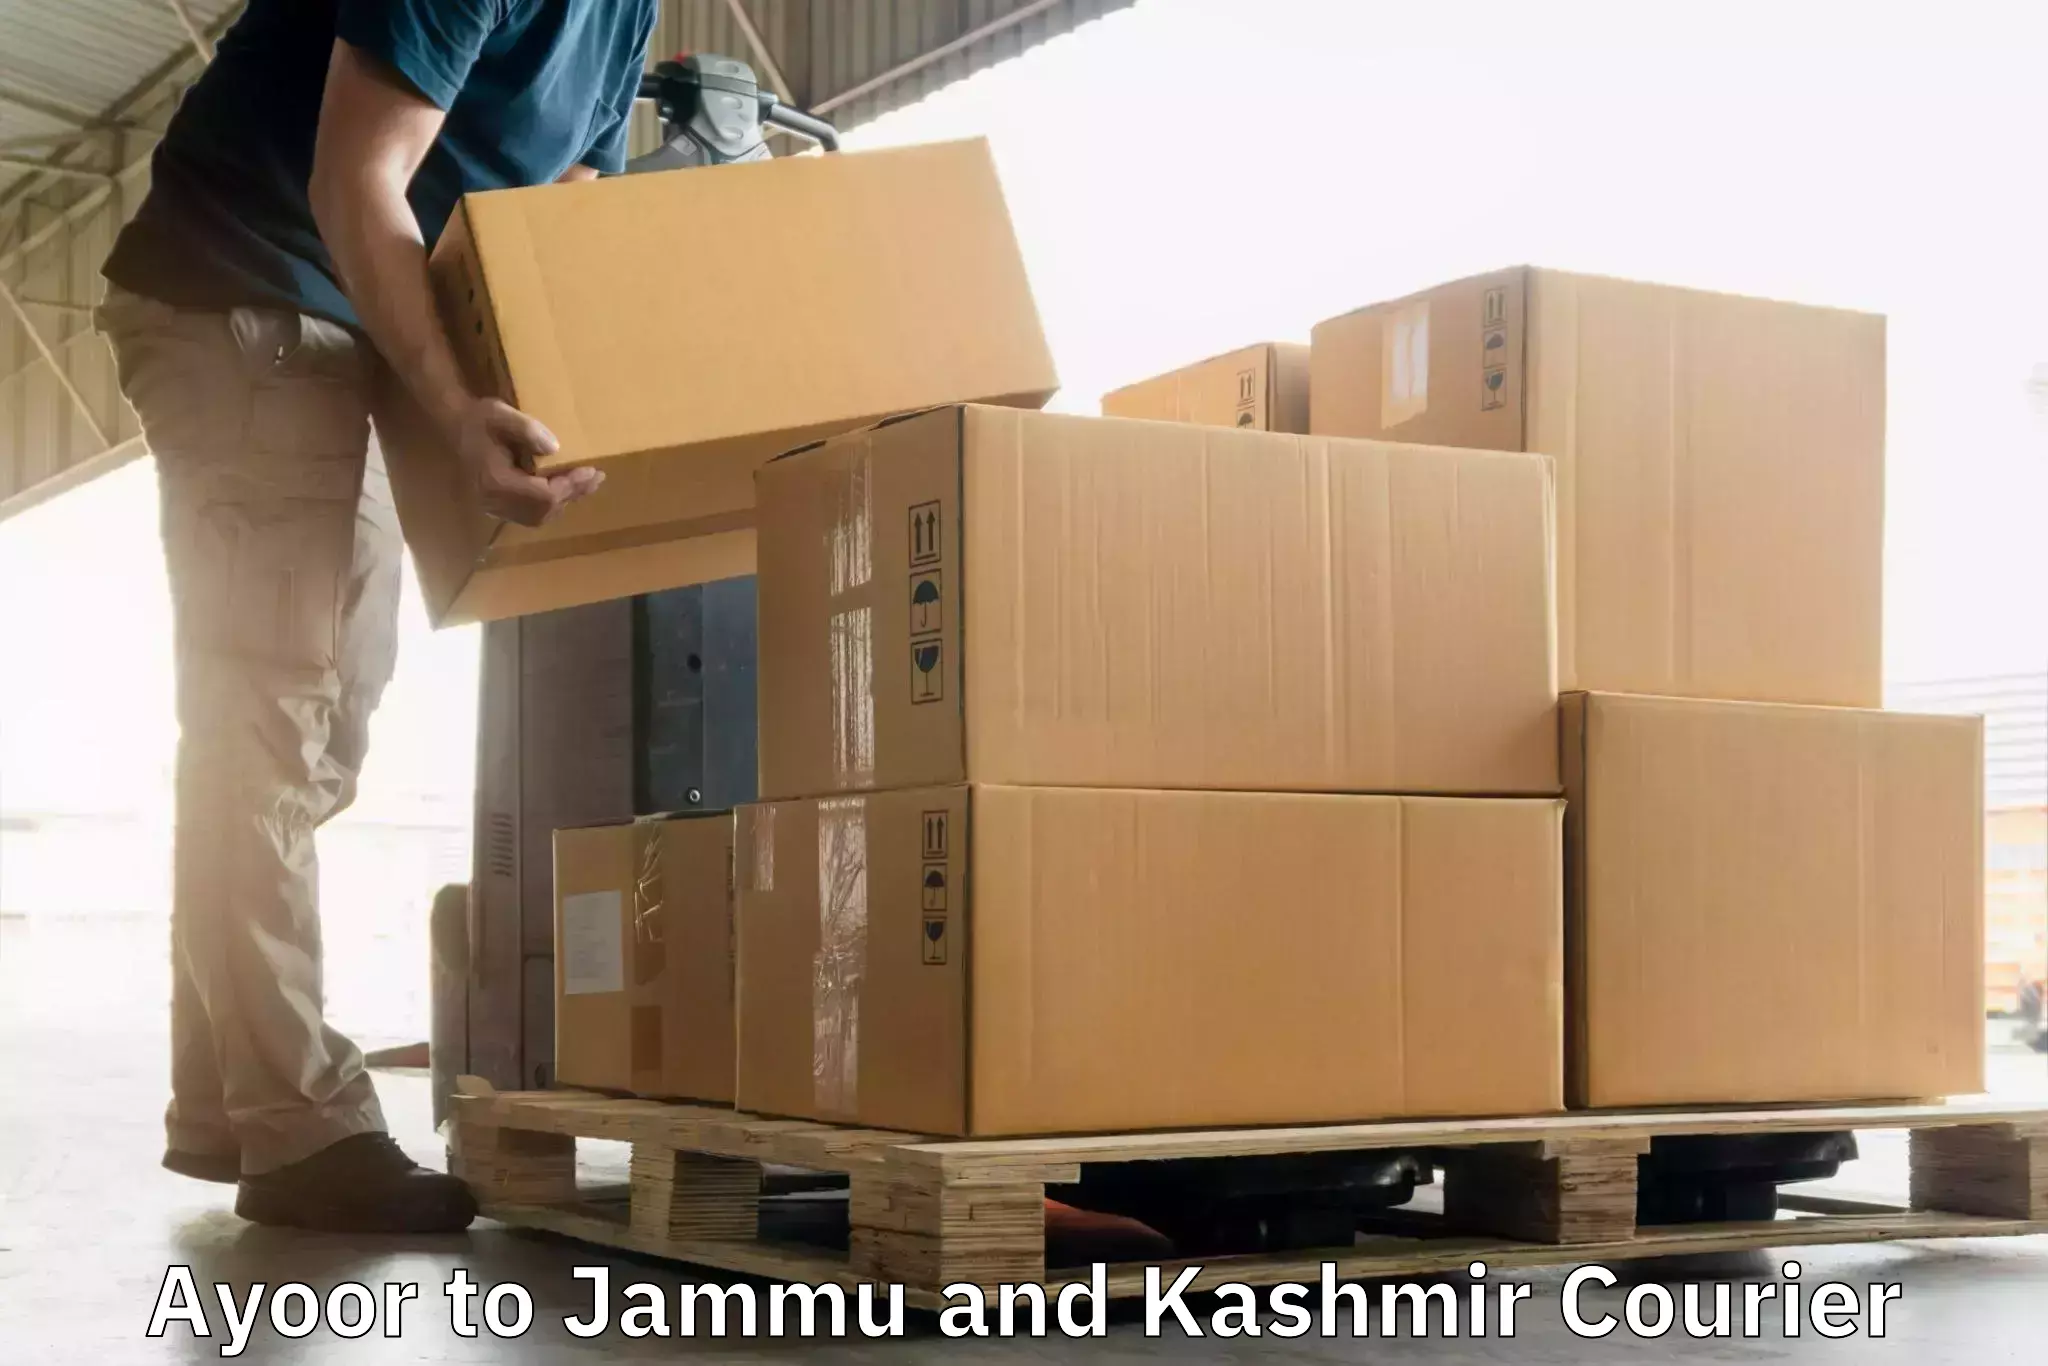 Cost-effective courier options Ayoor to RS Pura